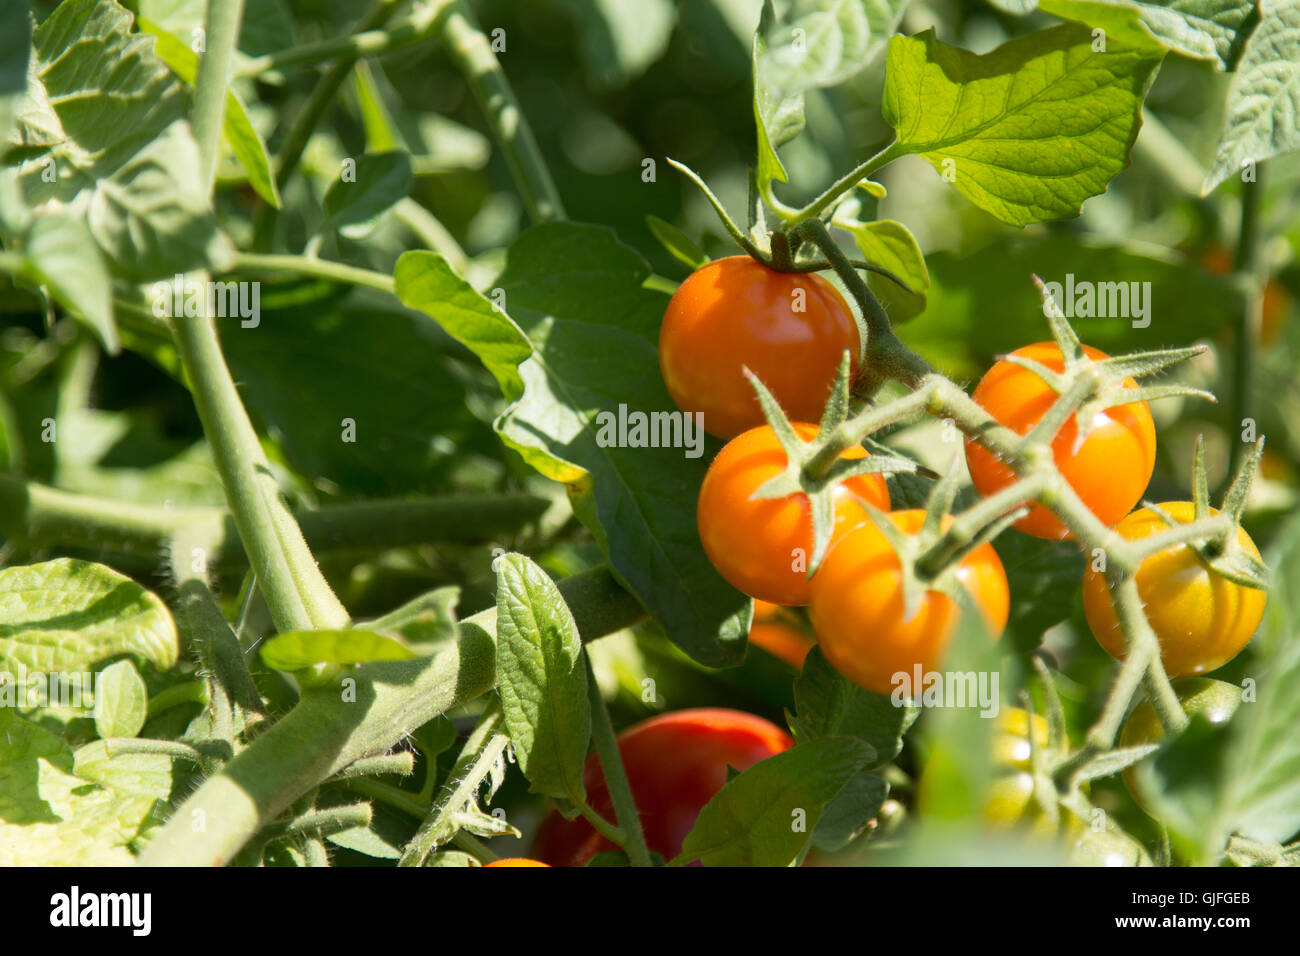 Cluster of Ripe Cherry Tomatoes Stock Photo